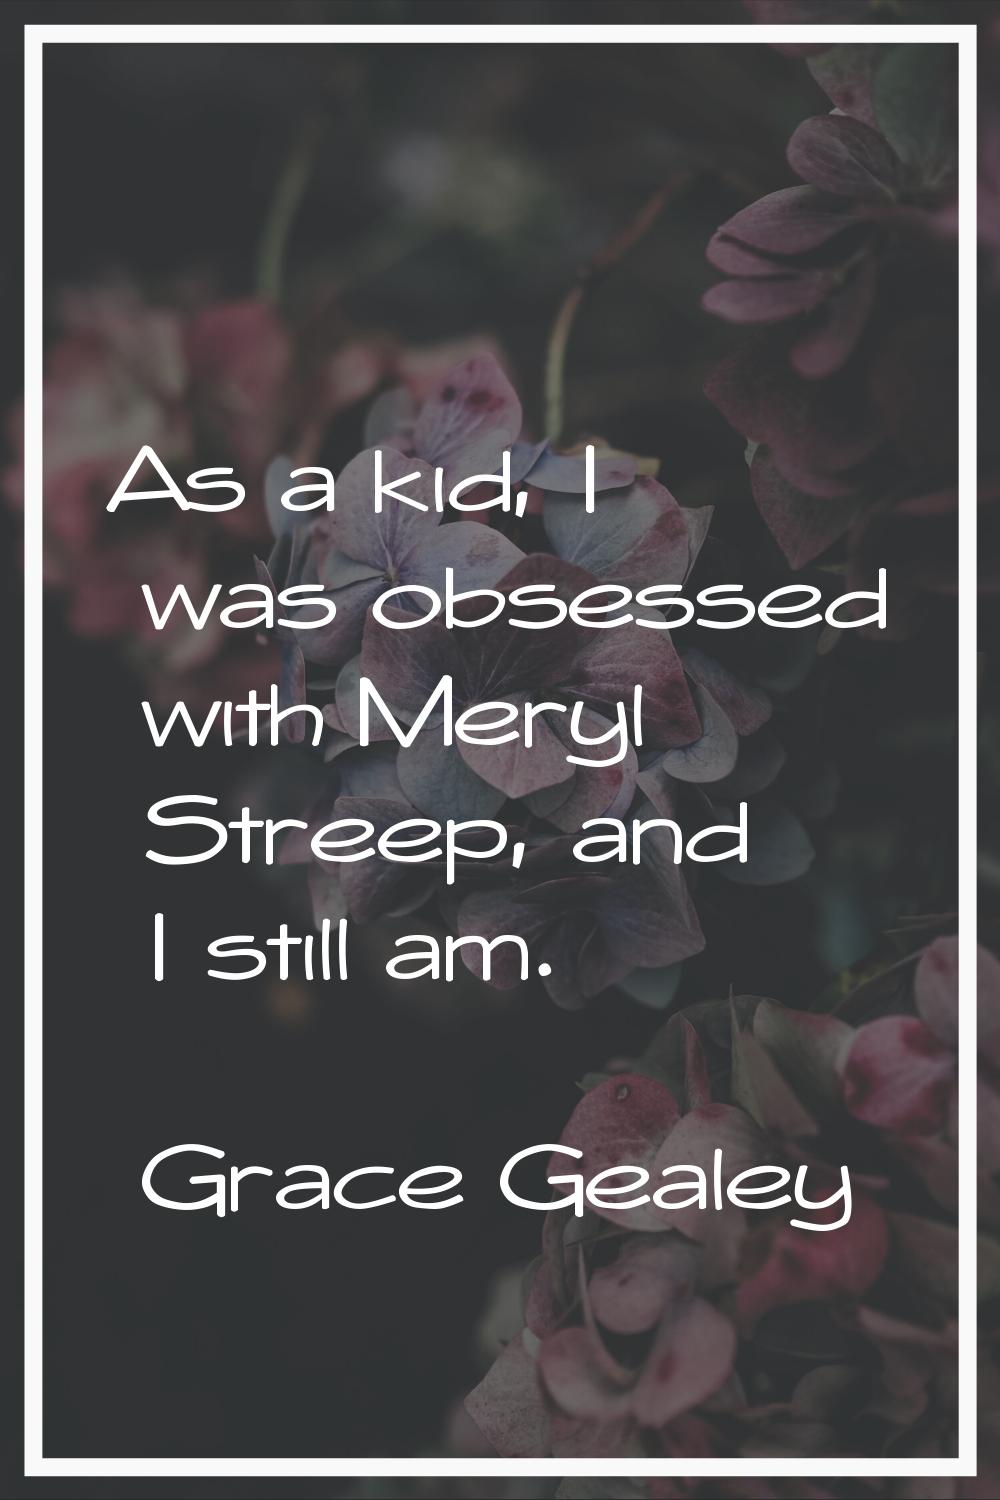 As a kid, I was obsessed with Meryl Streep, and I still am.